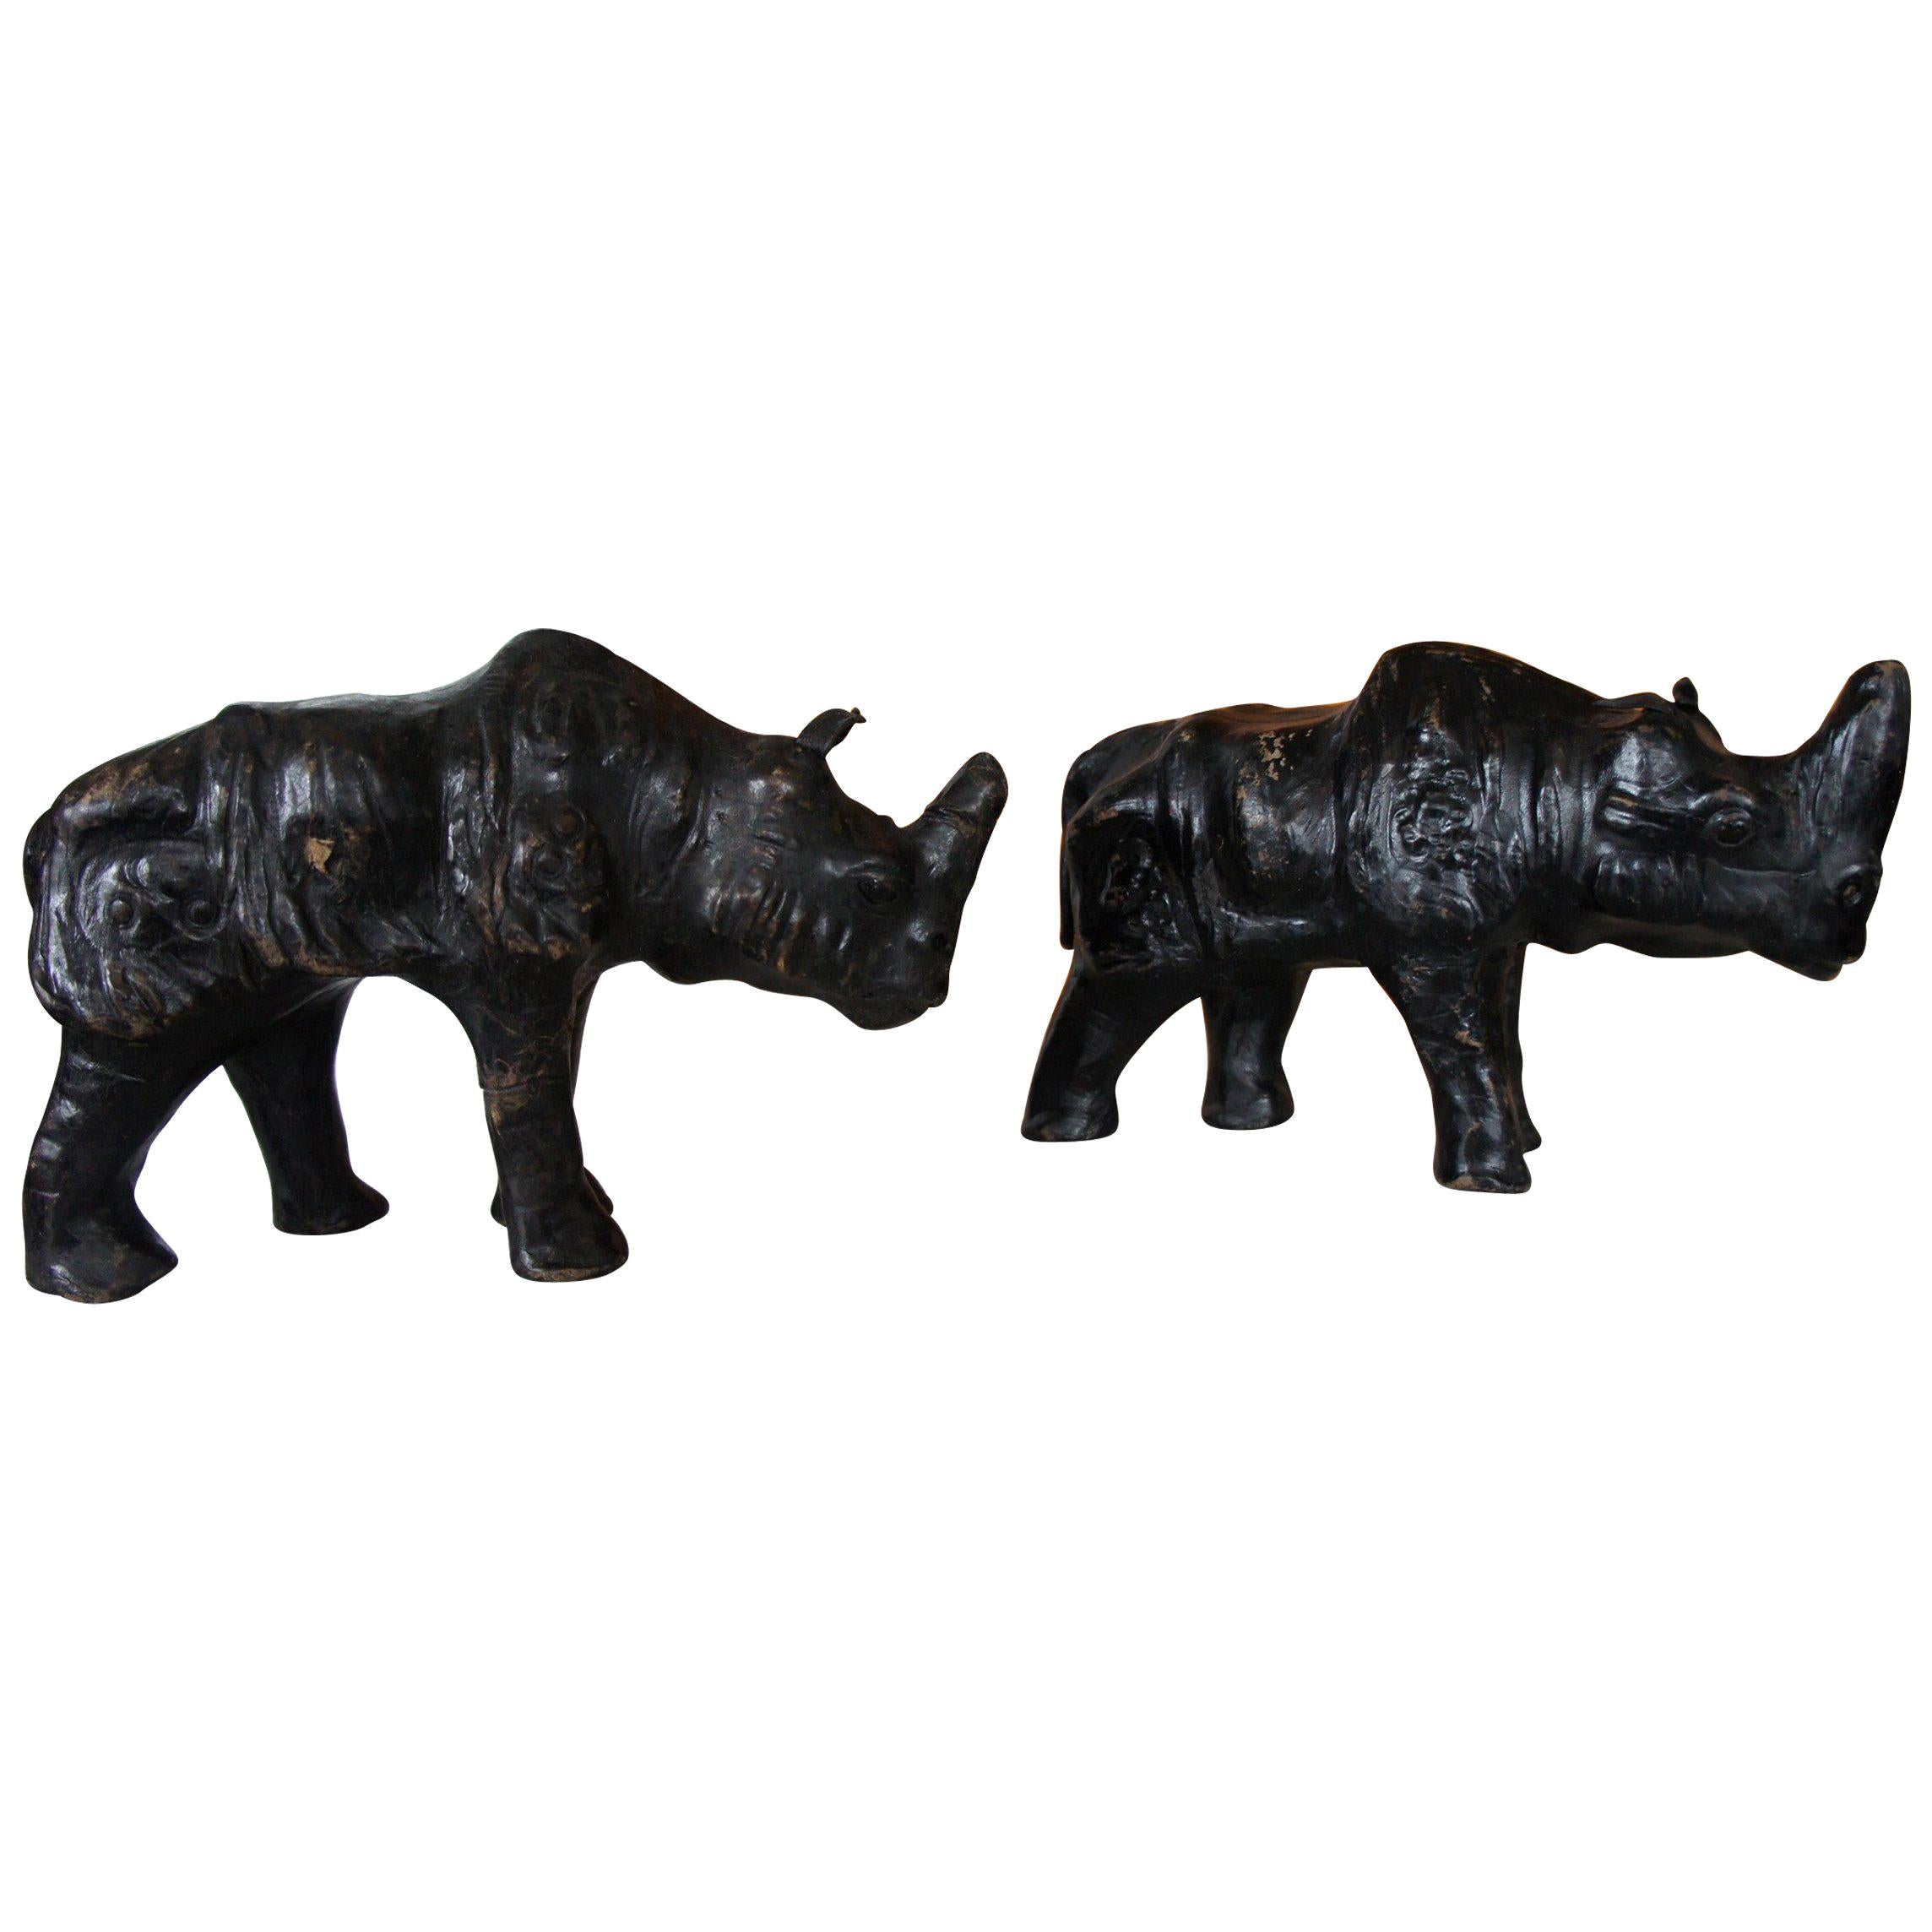 Rare and Small Pair of Black Rhino Sculptures Leather on Wood with Glass Eyes For Sale